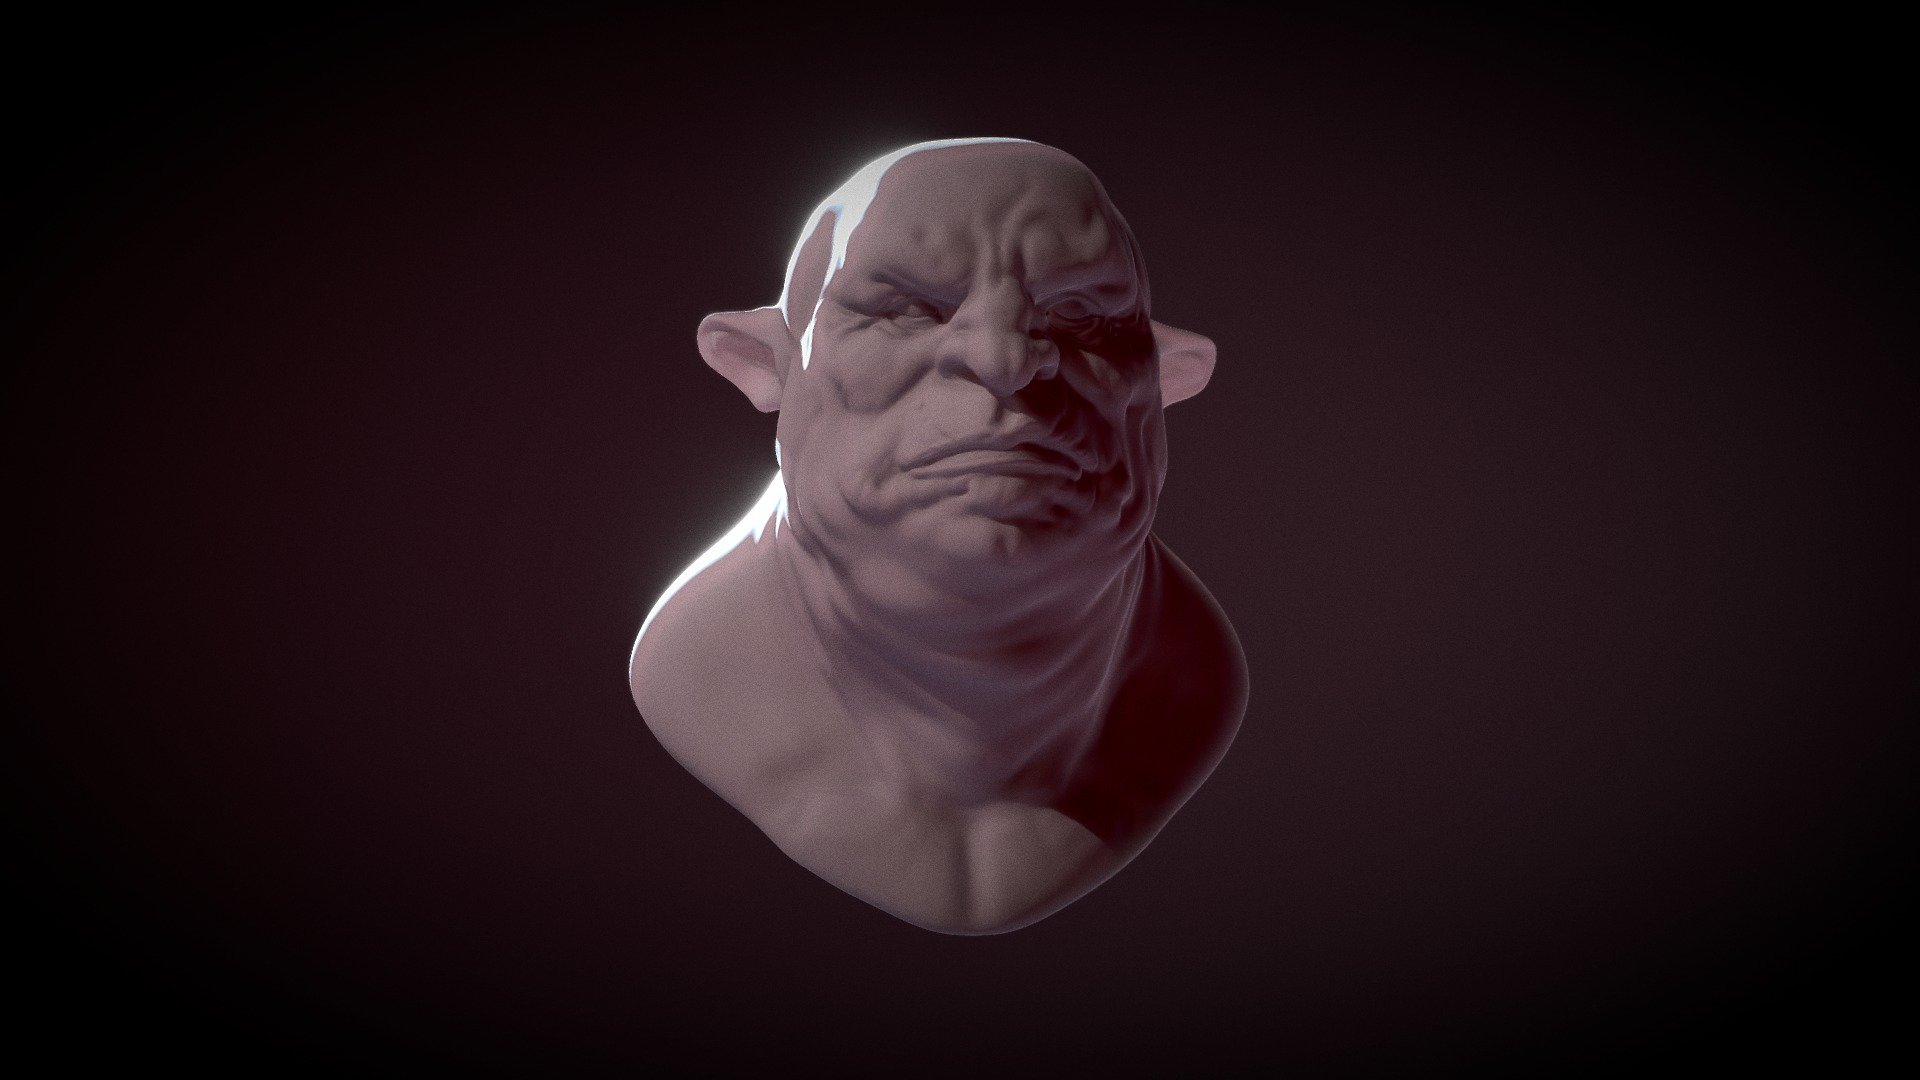 Another head sculpt made in sculptgl. This time i used base mesh that you can find here
http://luckilytip.blogspot.com/
based on concept by unknown artist, if you recognize who he was, let me know.

Regards 3d model